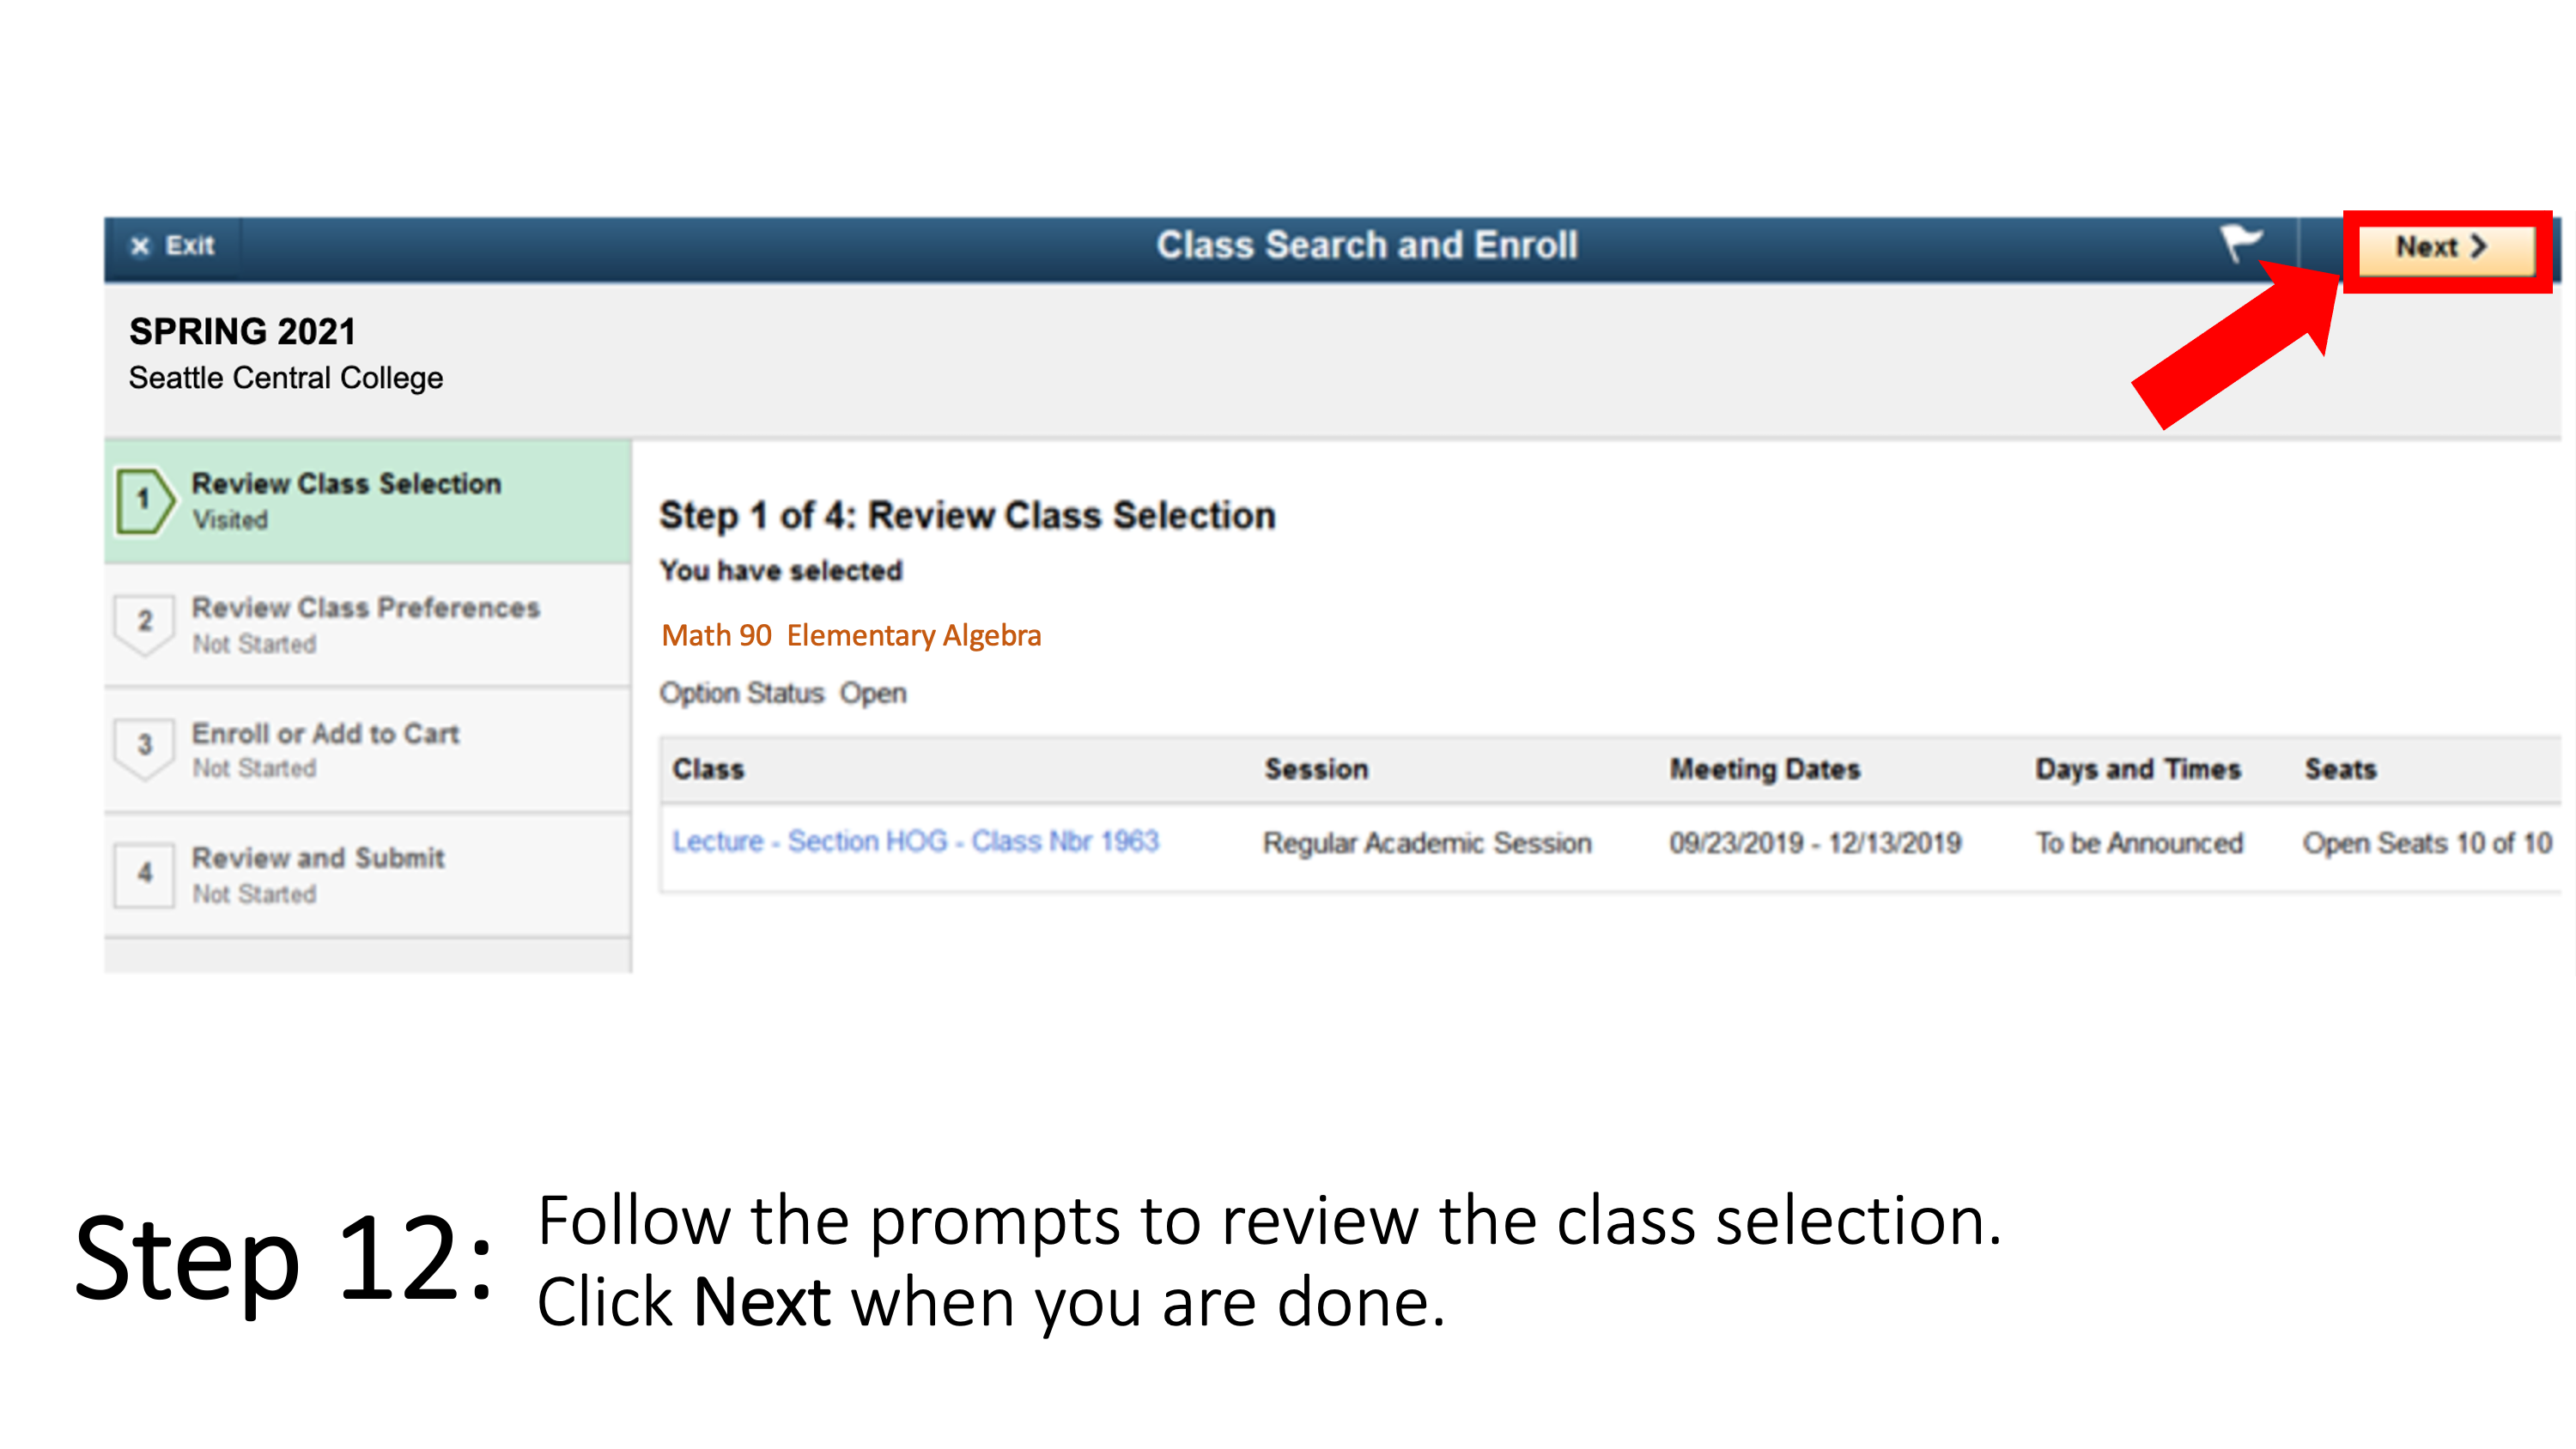 Follow the prompts to review the class selection. Click Next when you are done.